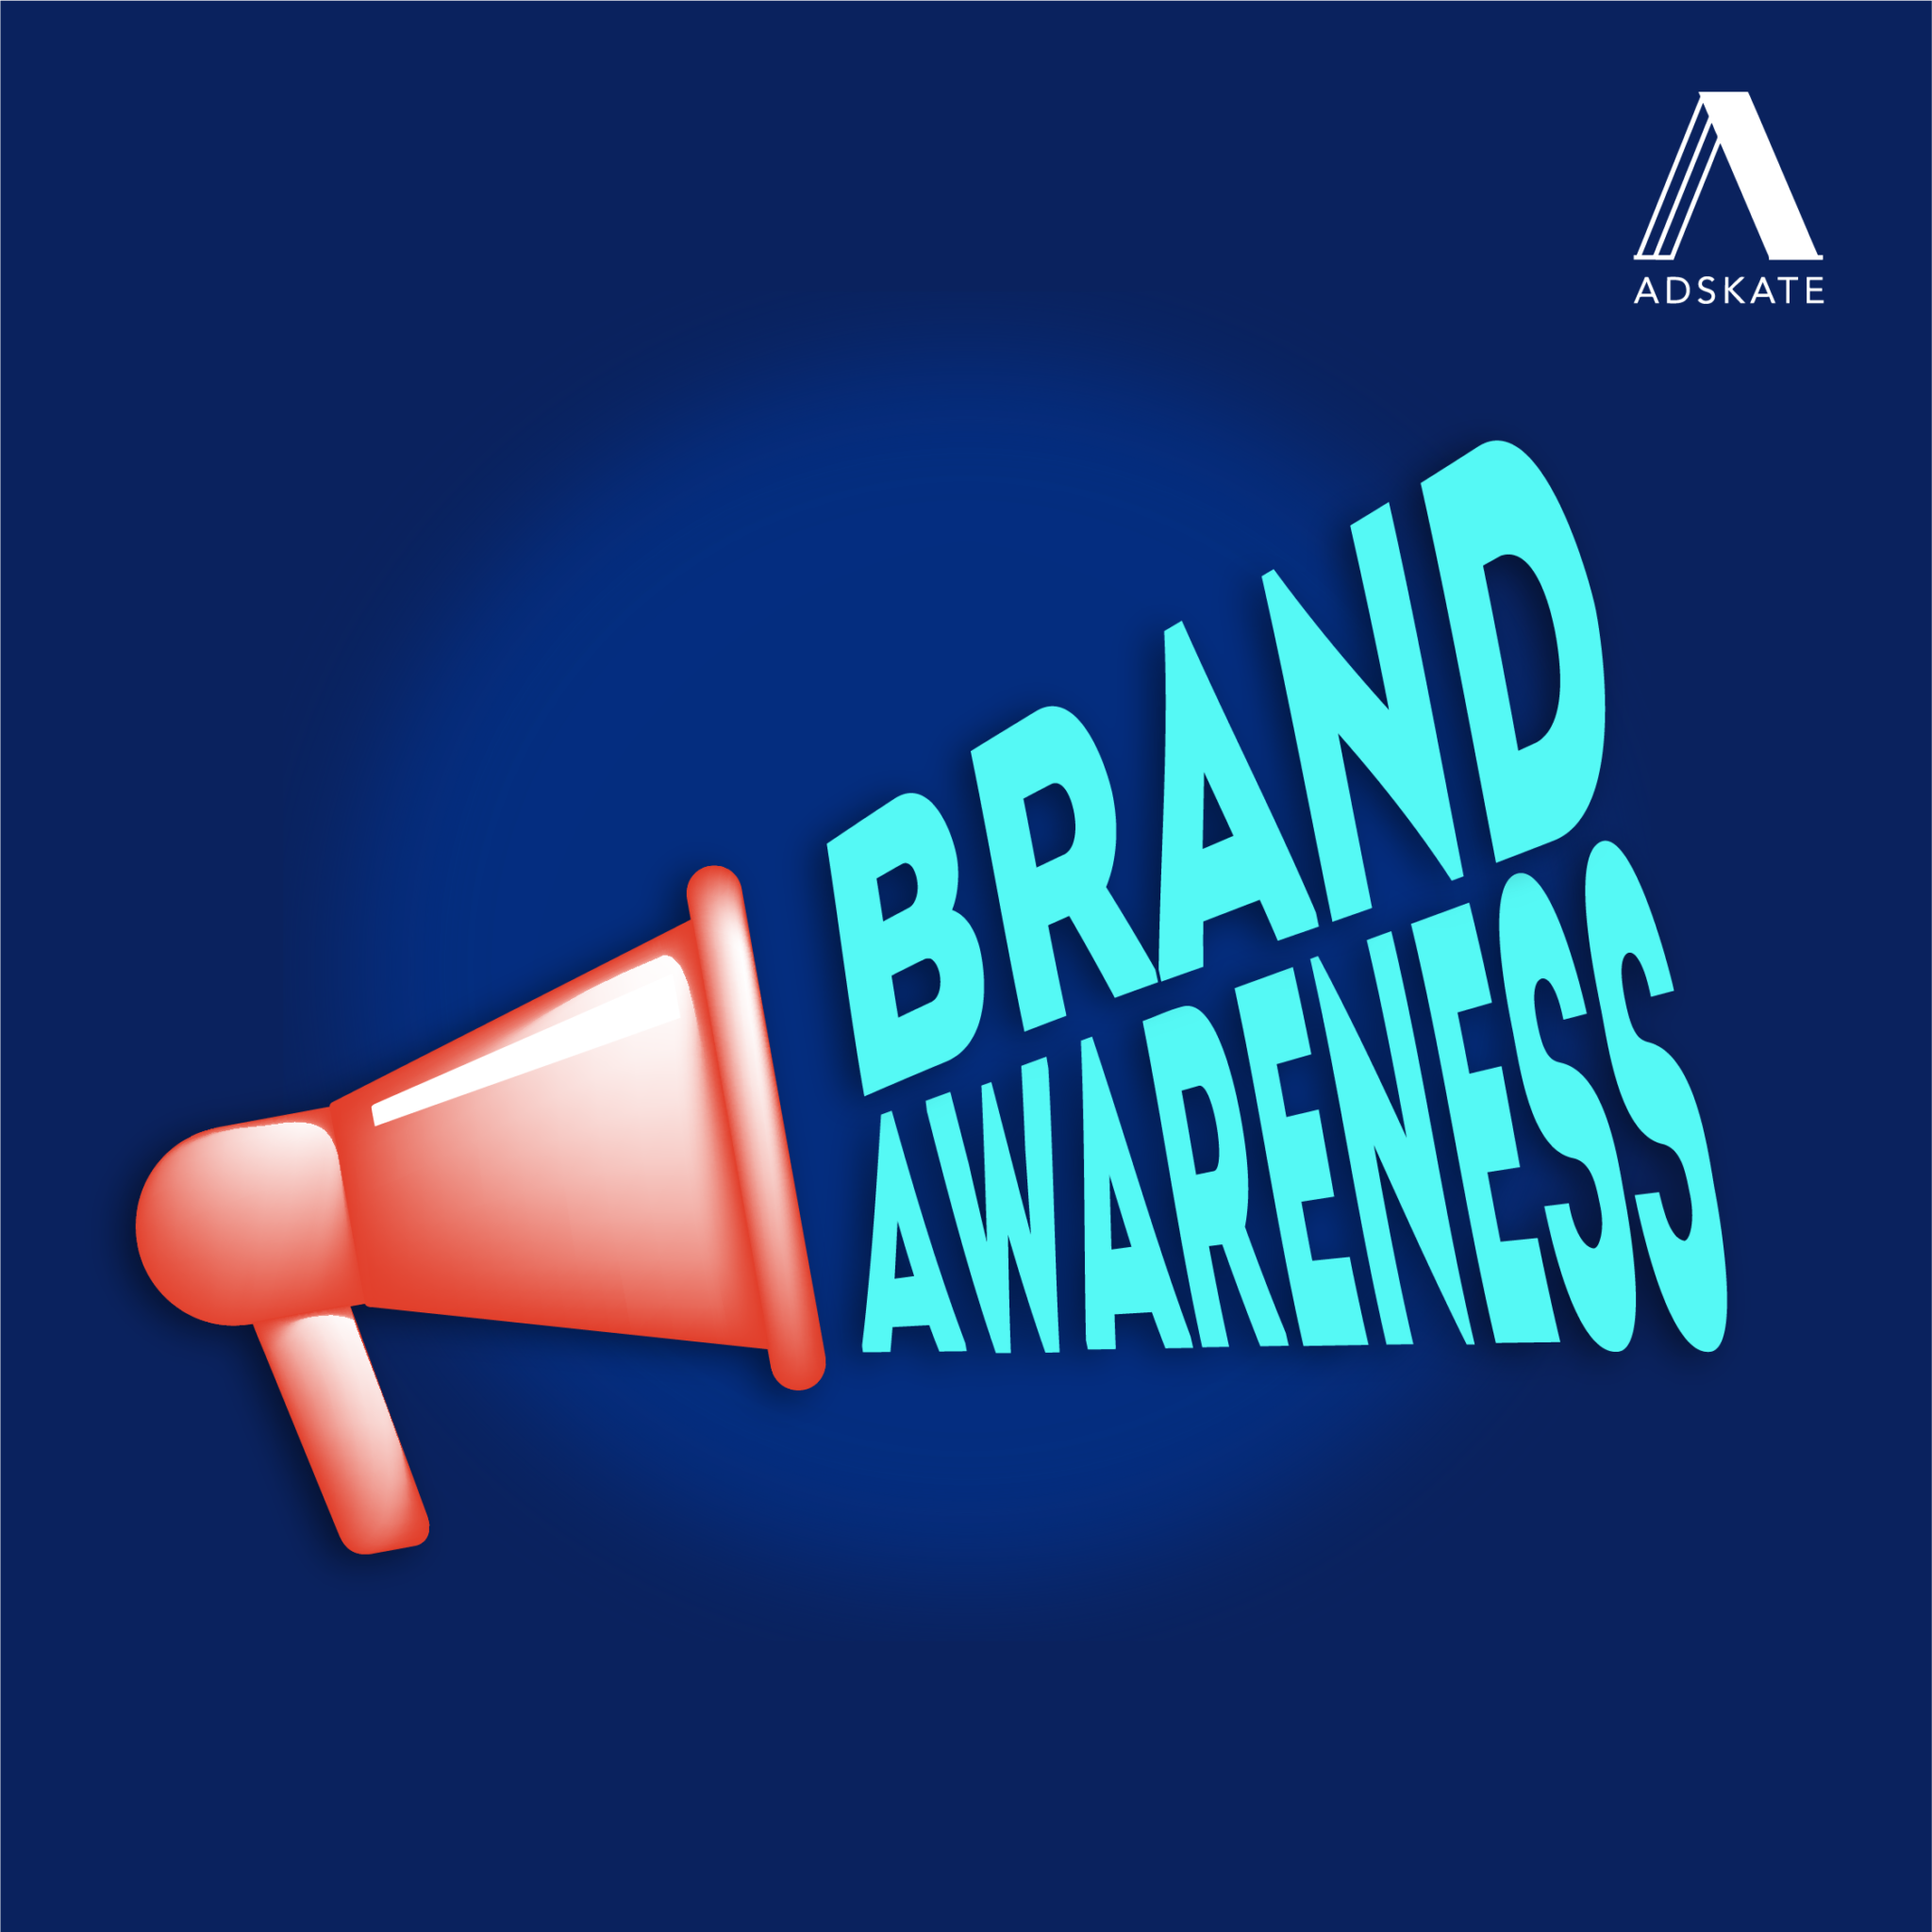 What is brand awareness and how to increase brand awareness?